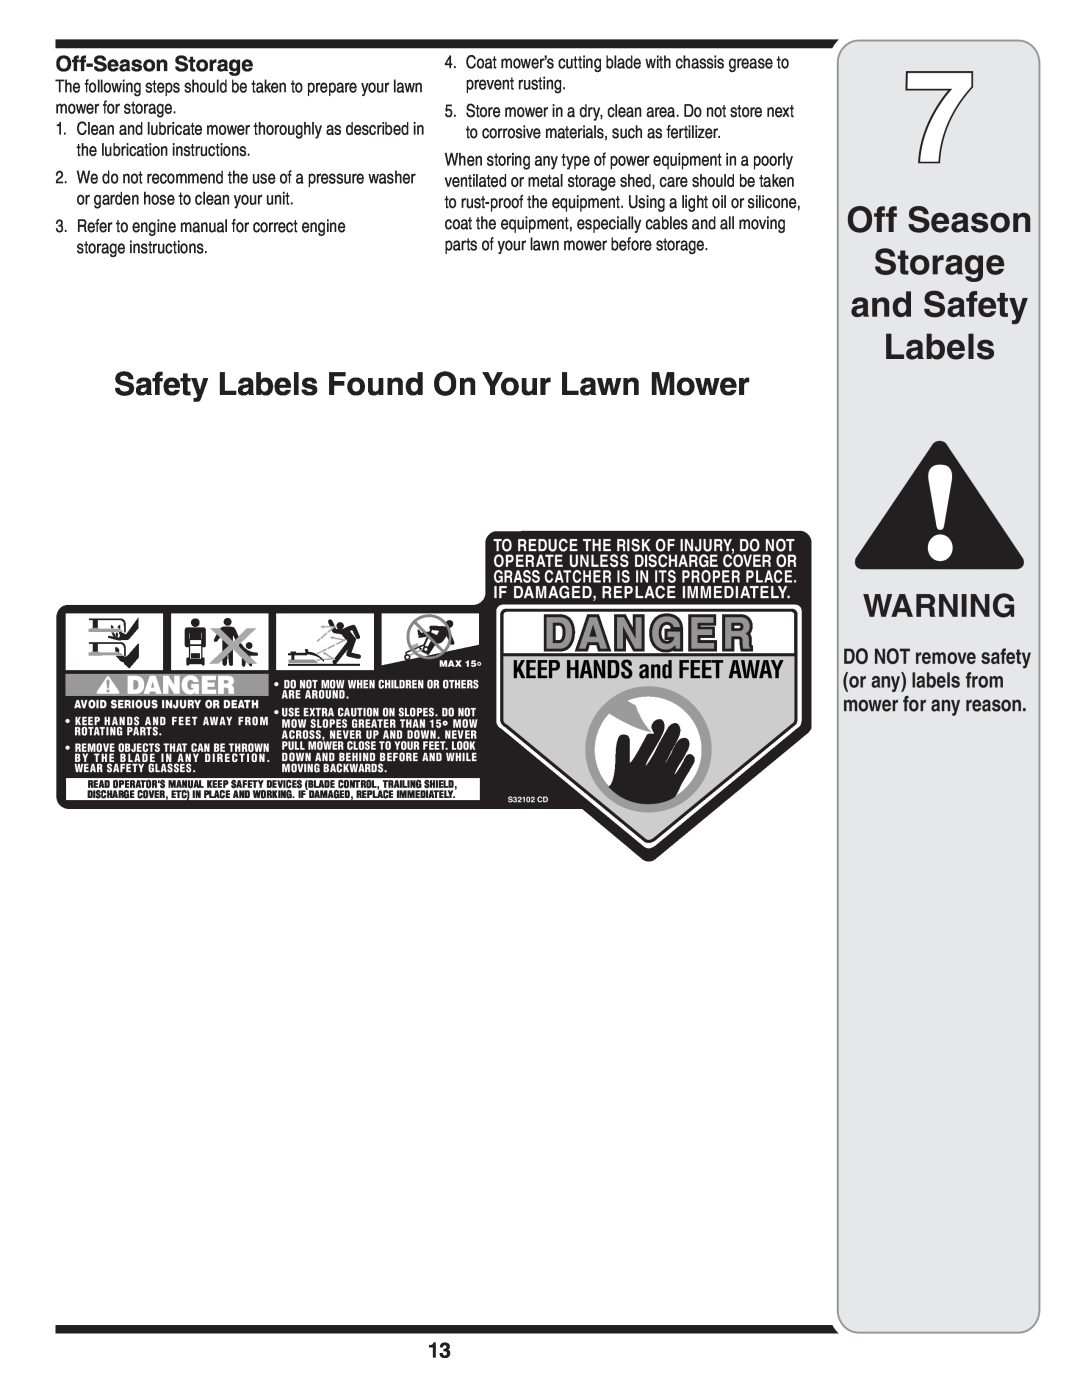 Honda Power Equipment V550 warranty Off Season Storage and Safety Labels, Safety Labels Found On Your Lawn Mower 